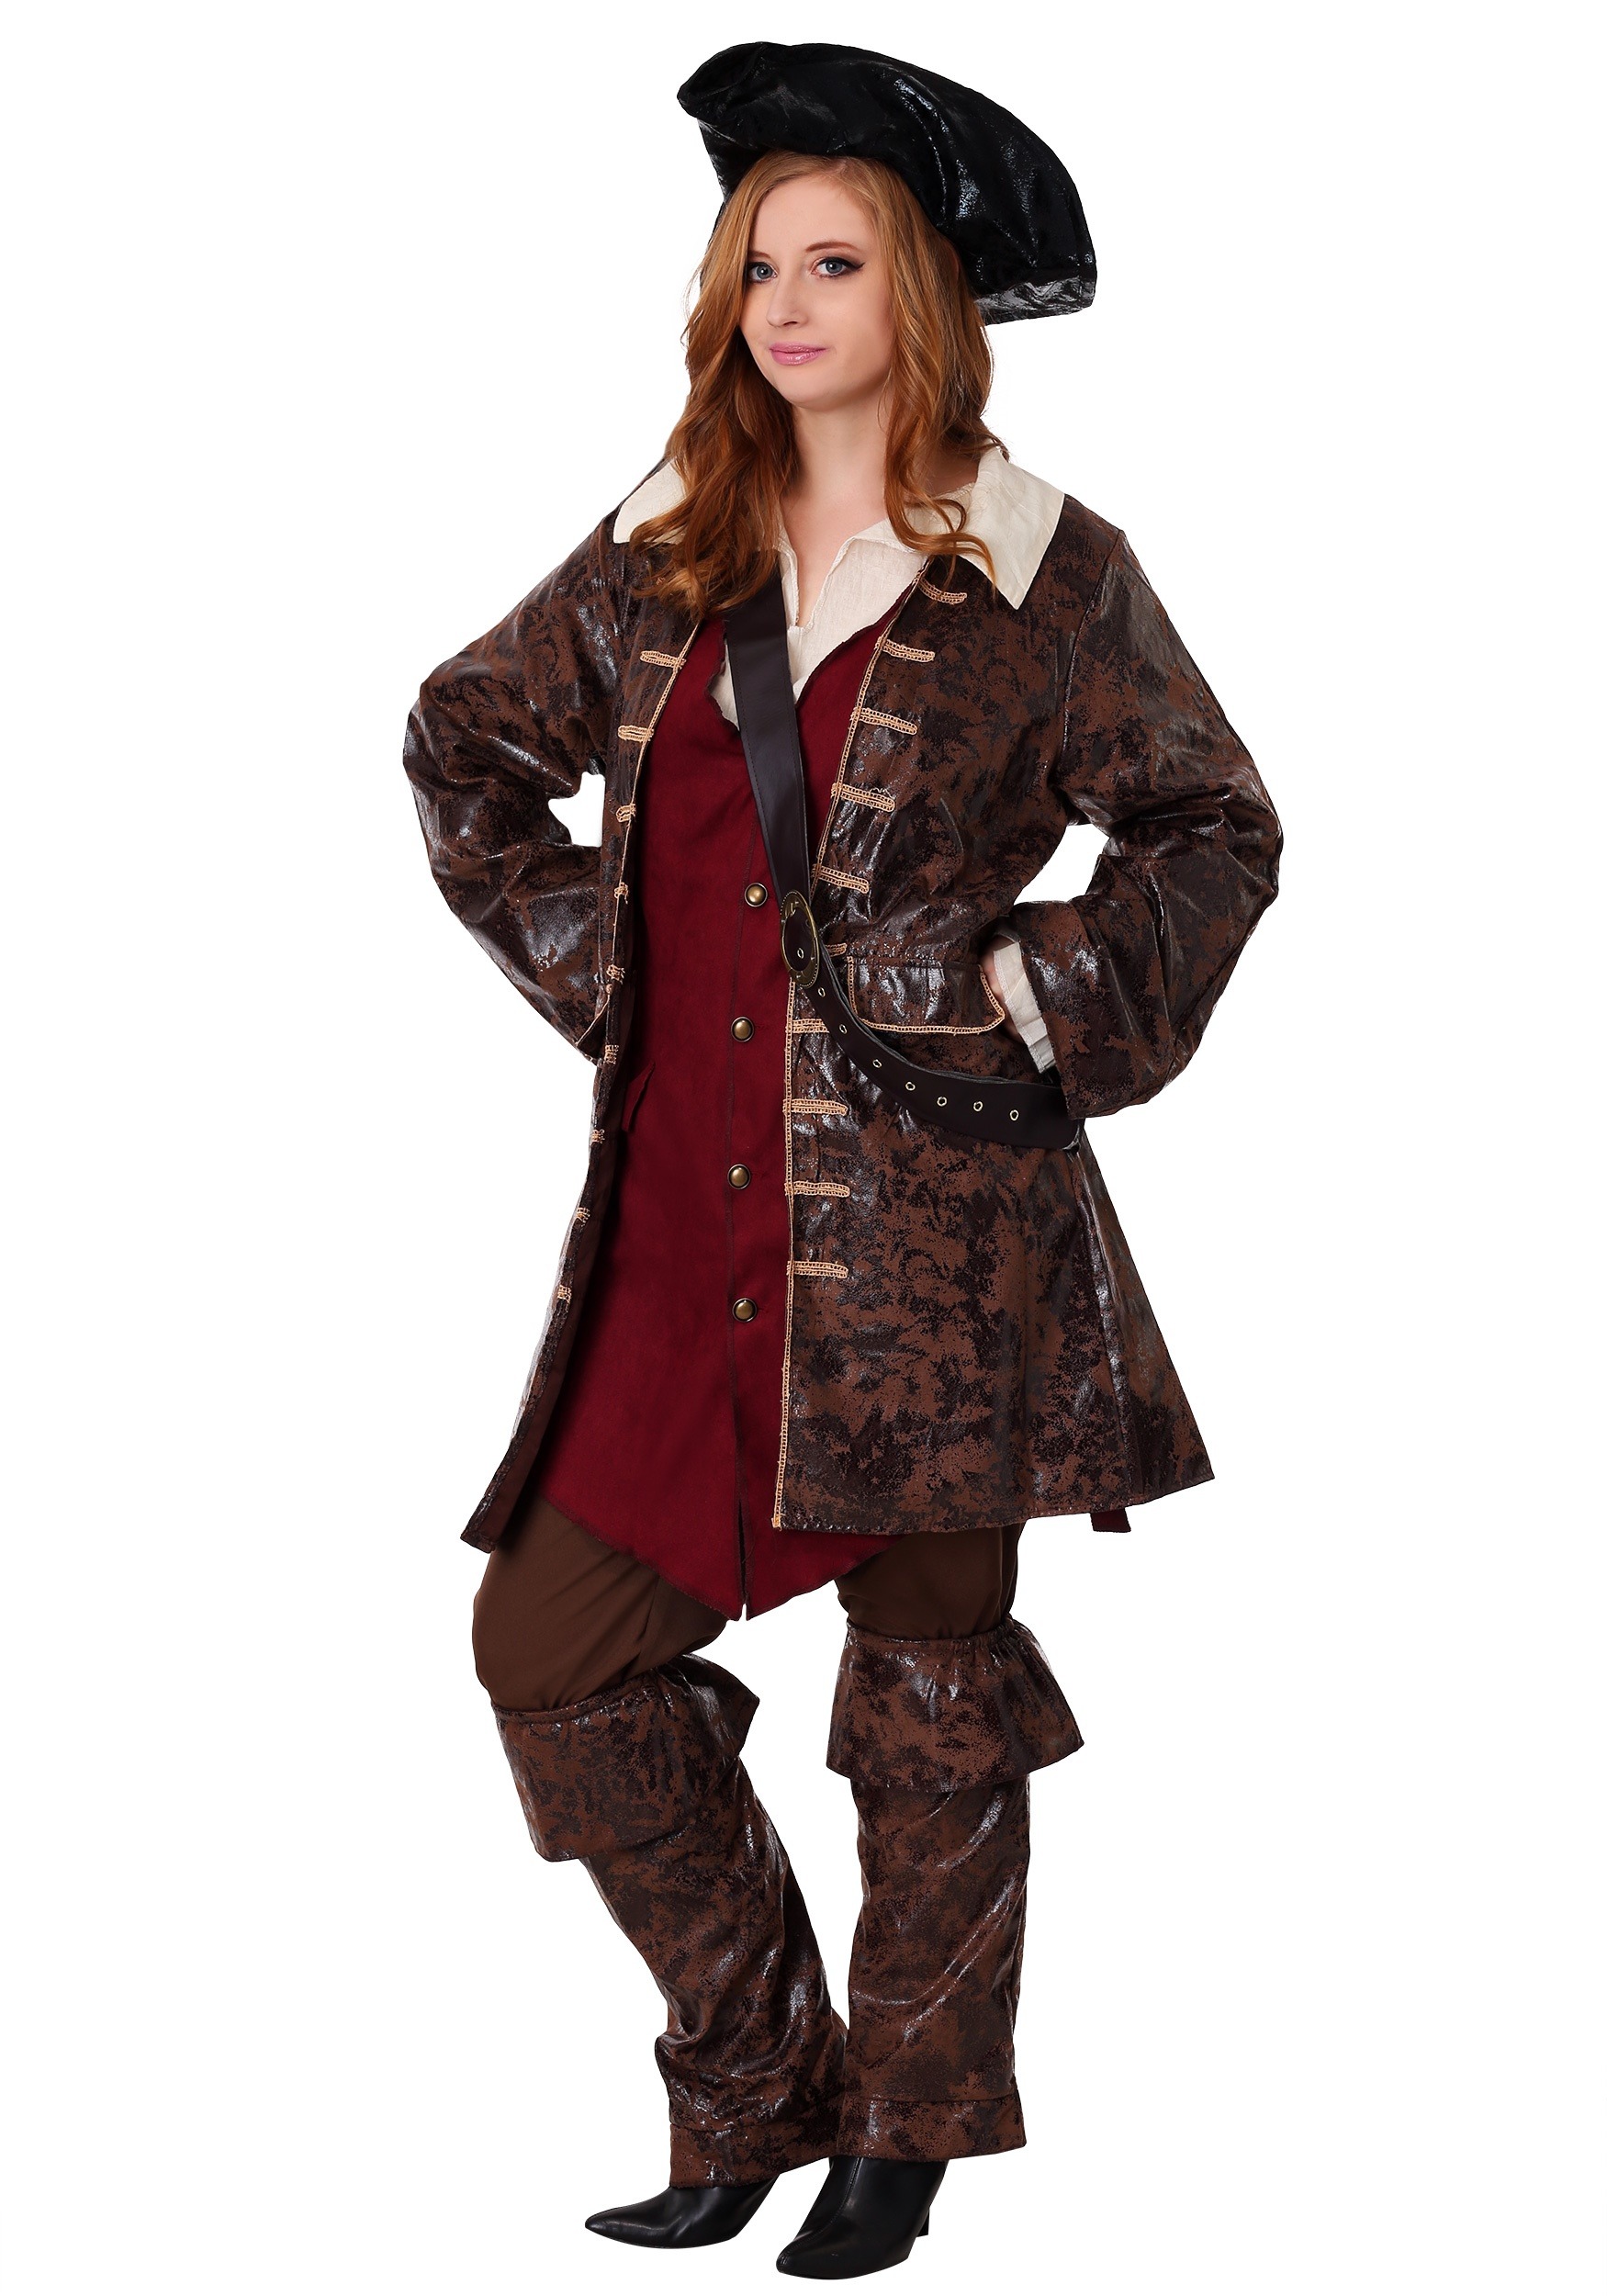 Caribbean Pirate Plus Size Costume for Women